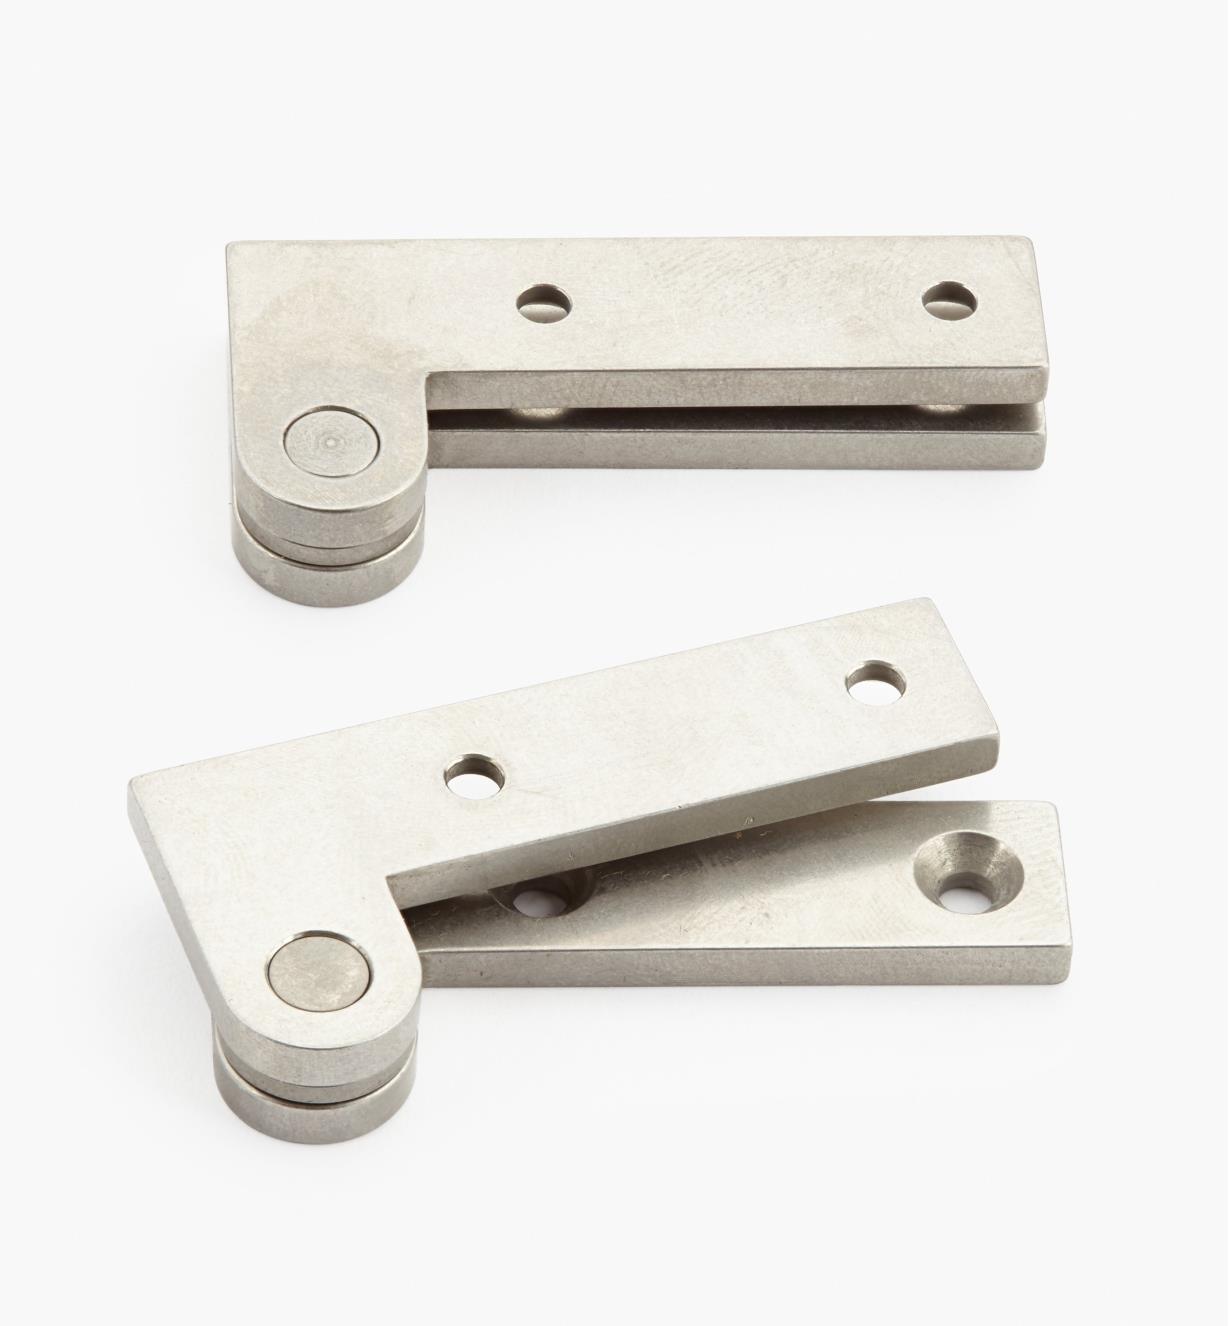 05H0157 - 7/8" x 1 7/8" x 1/8", Stainless Steel Double-Offset Knife Hinges, pair